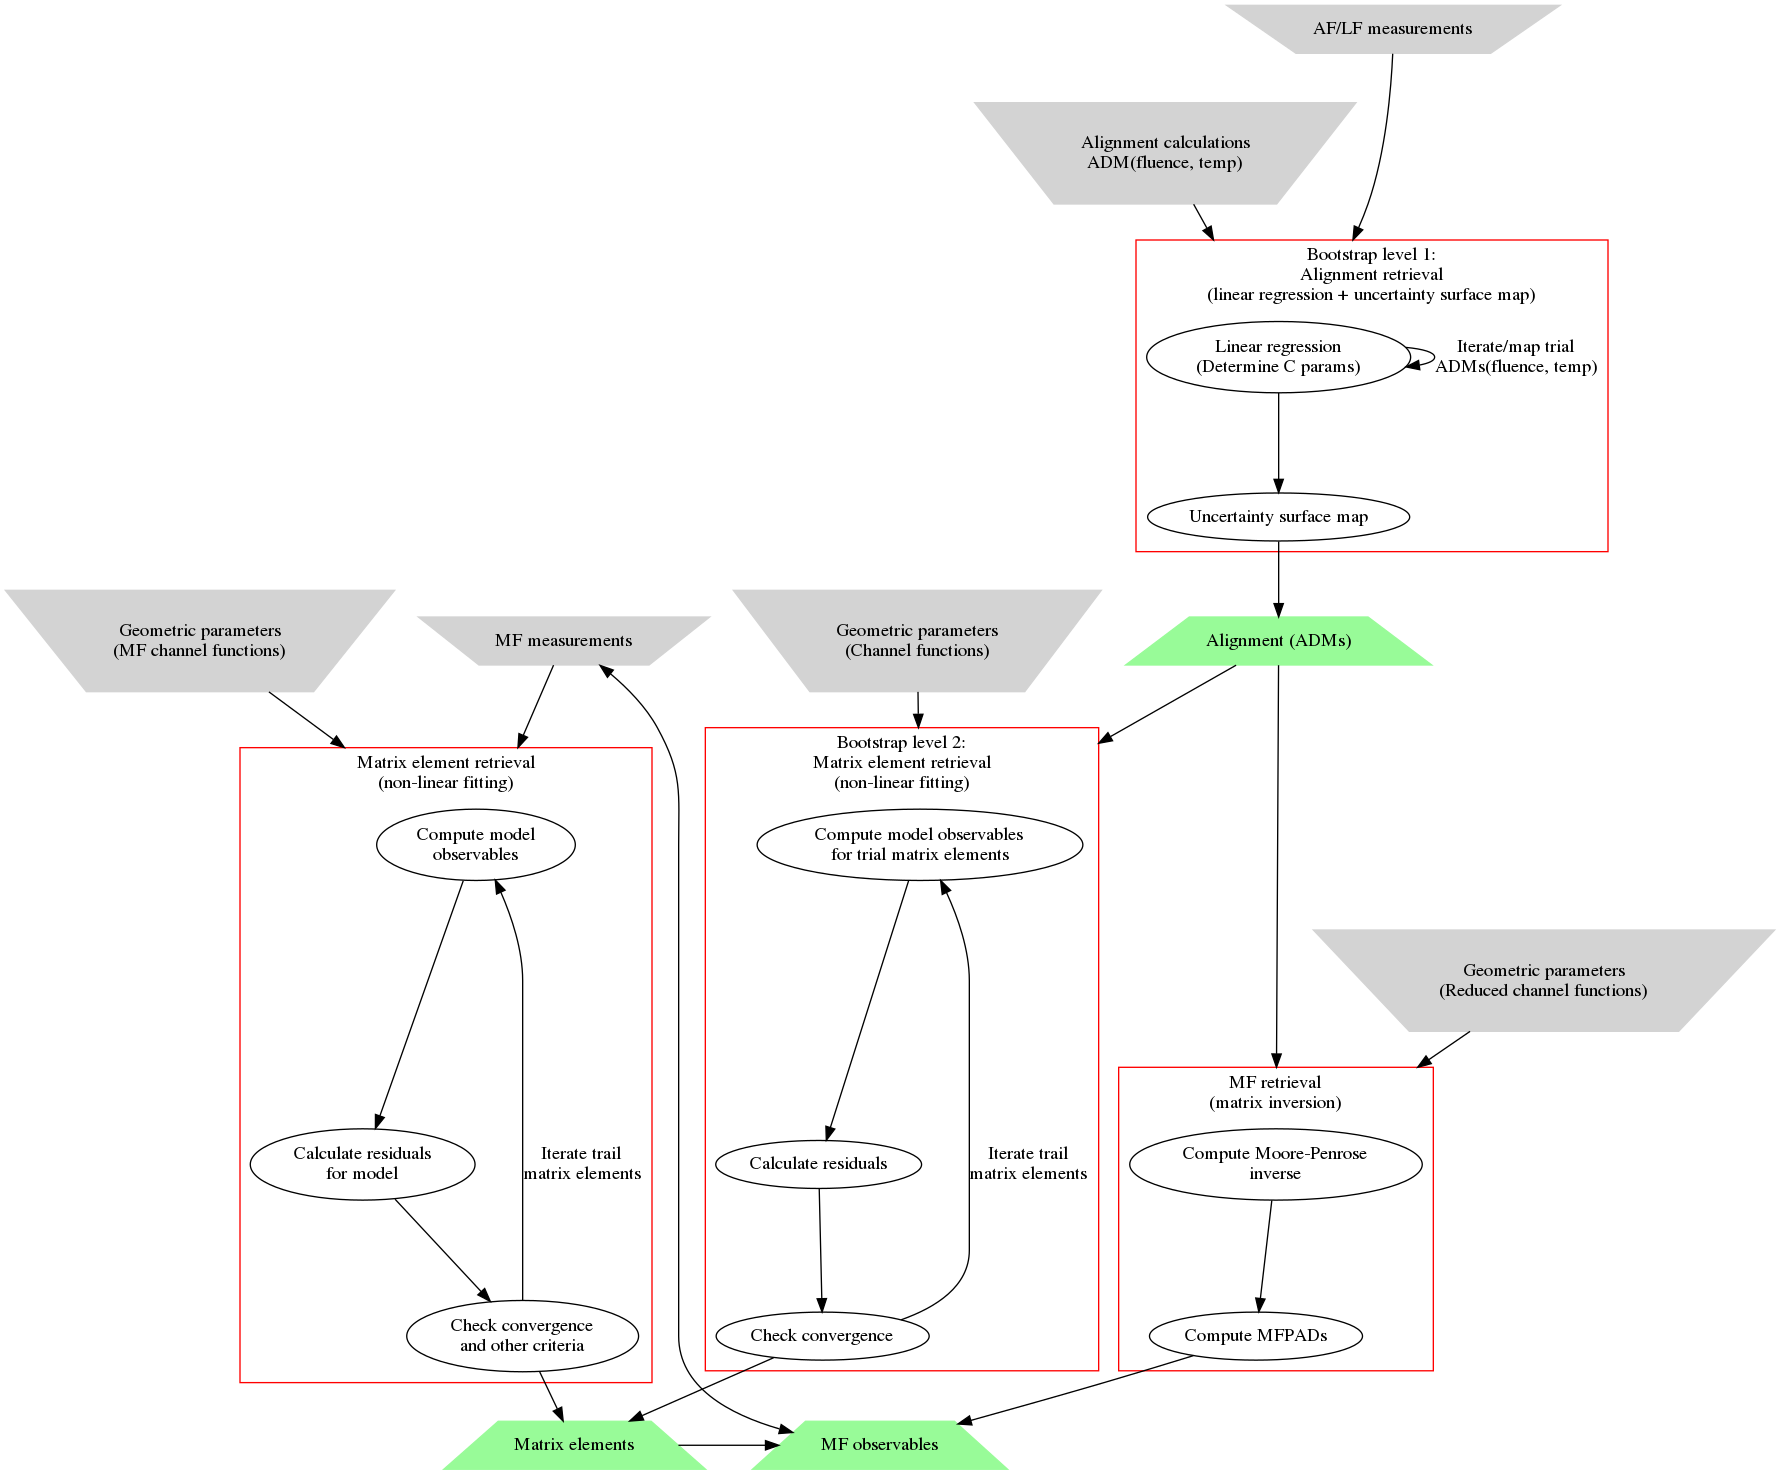 ../_images/all_protocol_flowchart_290822.gv.png